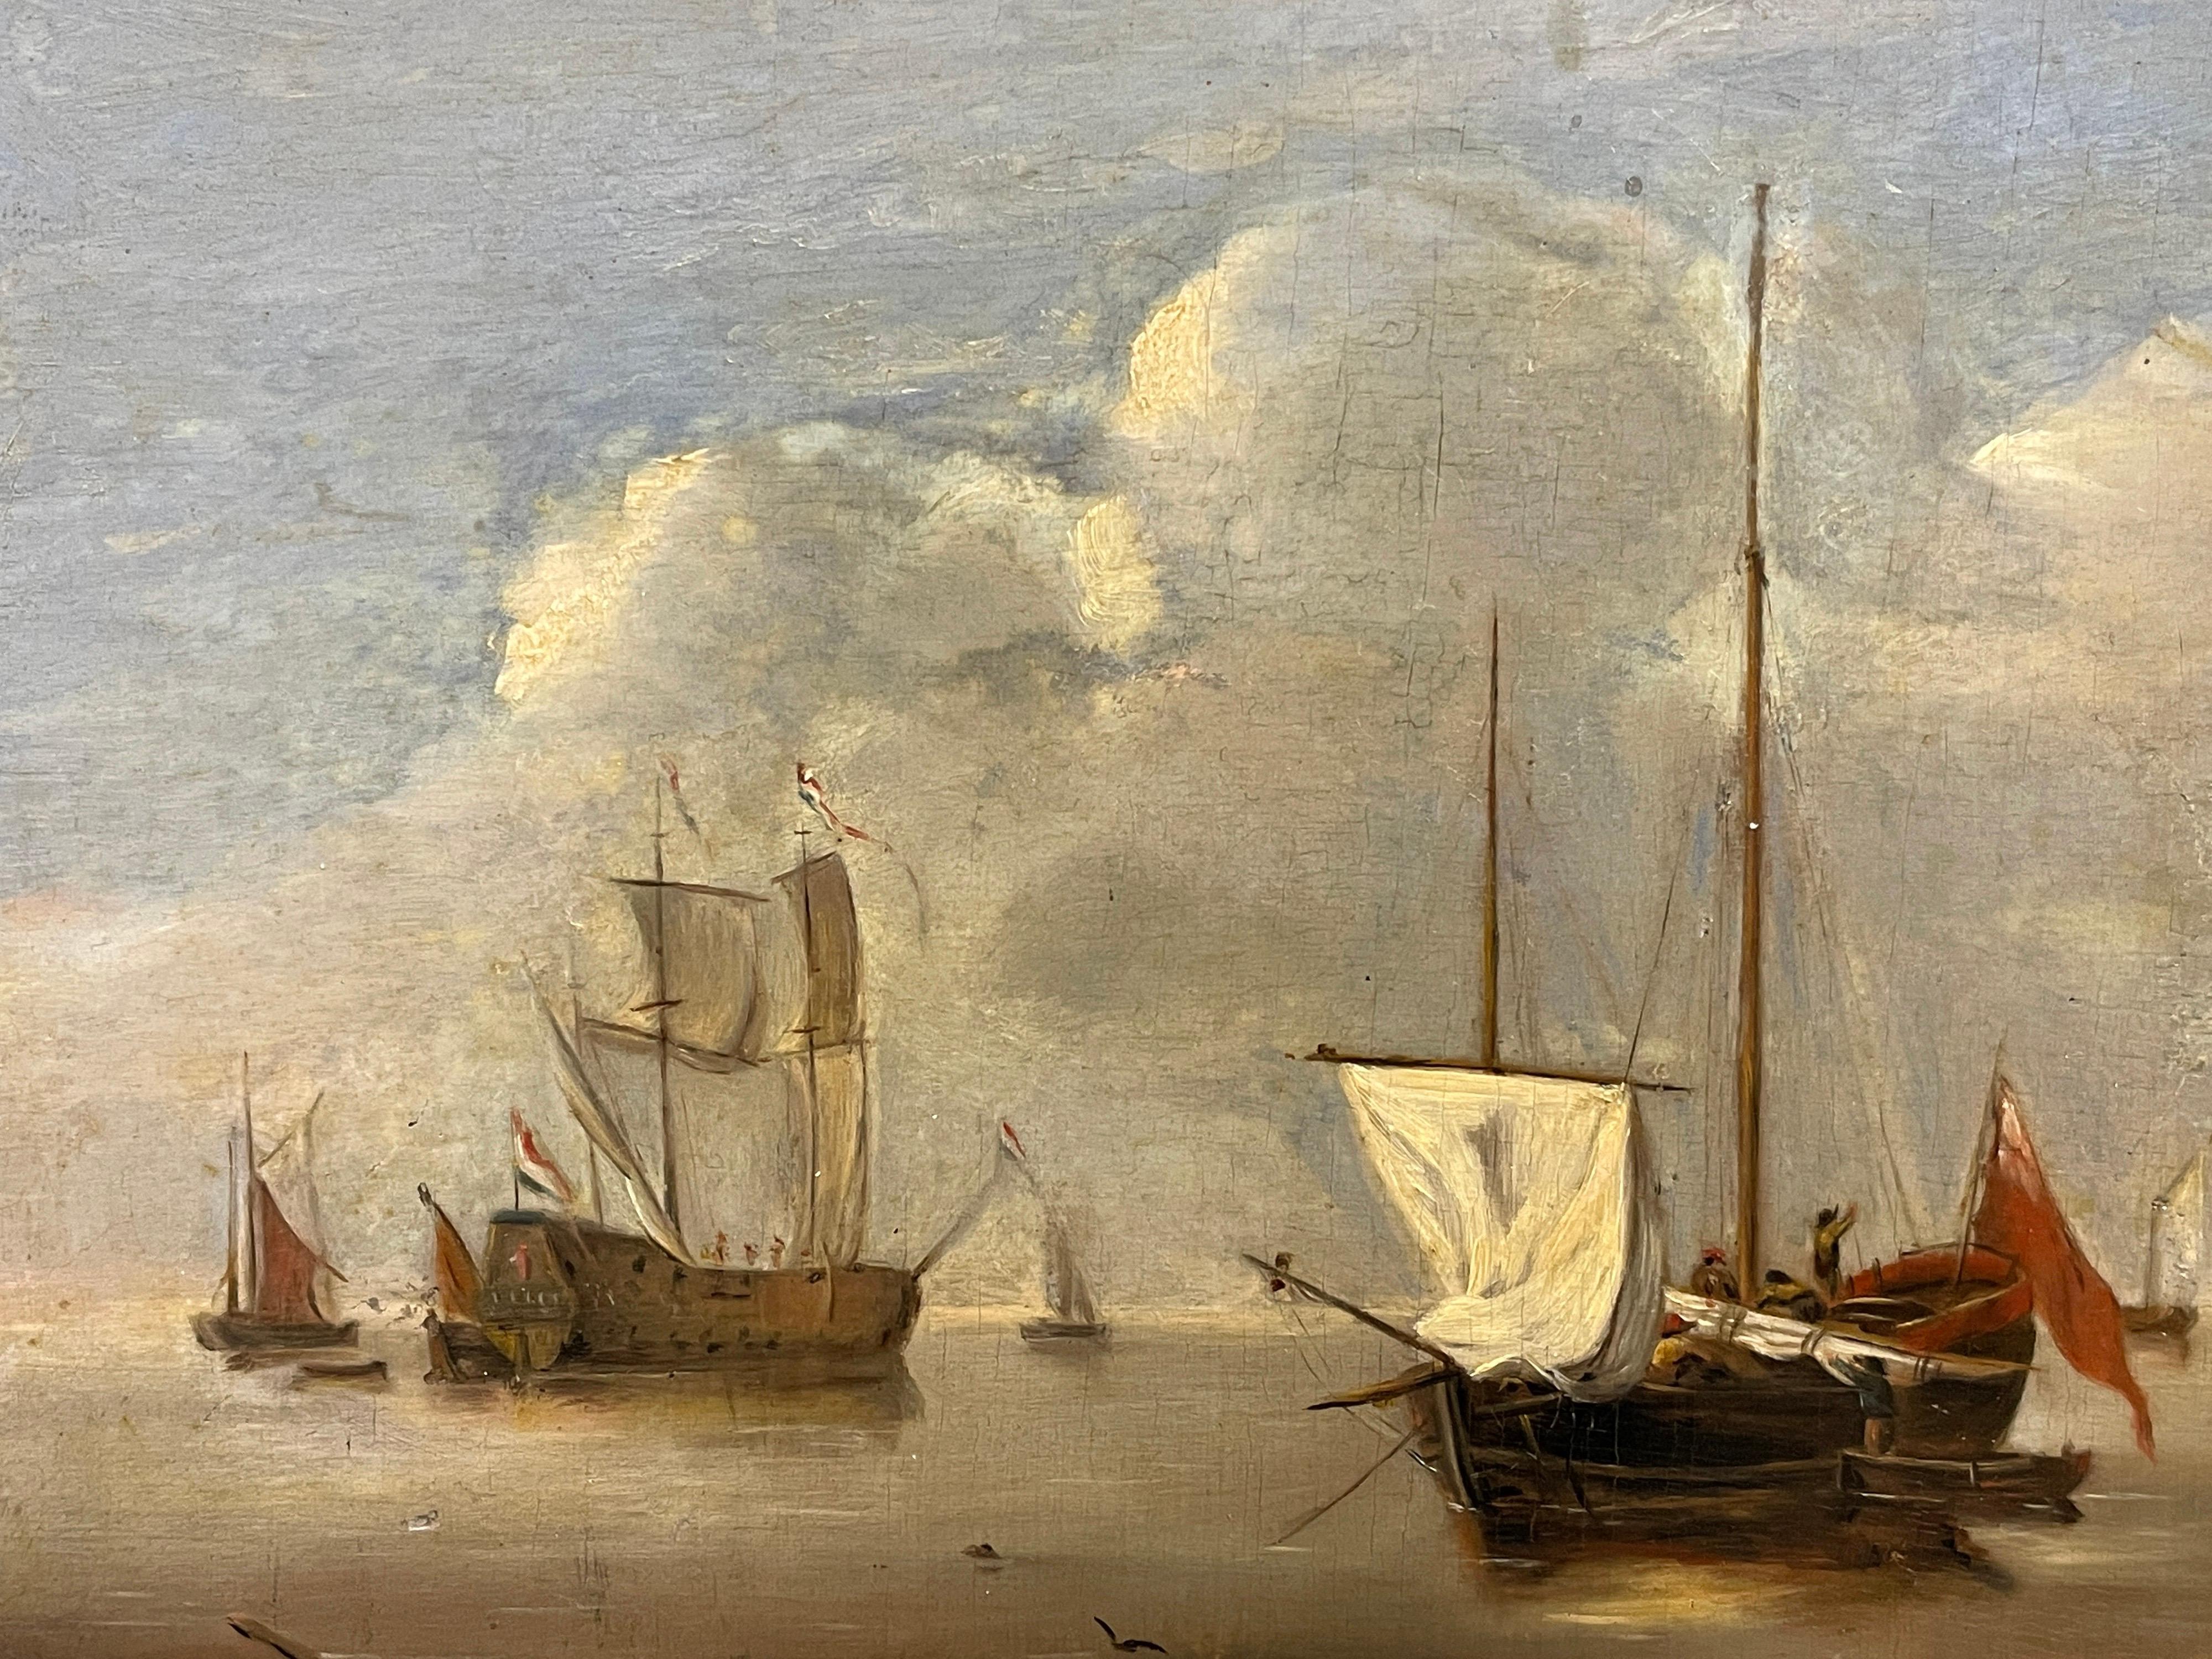 Shipping in Calm Waters, 18th Century Dutch Oil on Wood Panel, Man o War - Painting by Dutch 18th